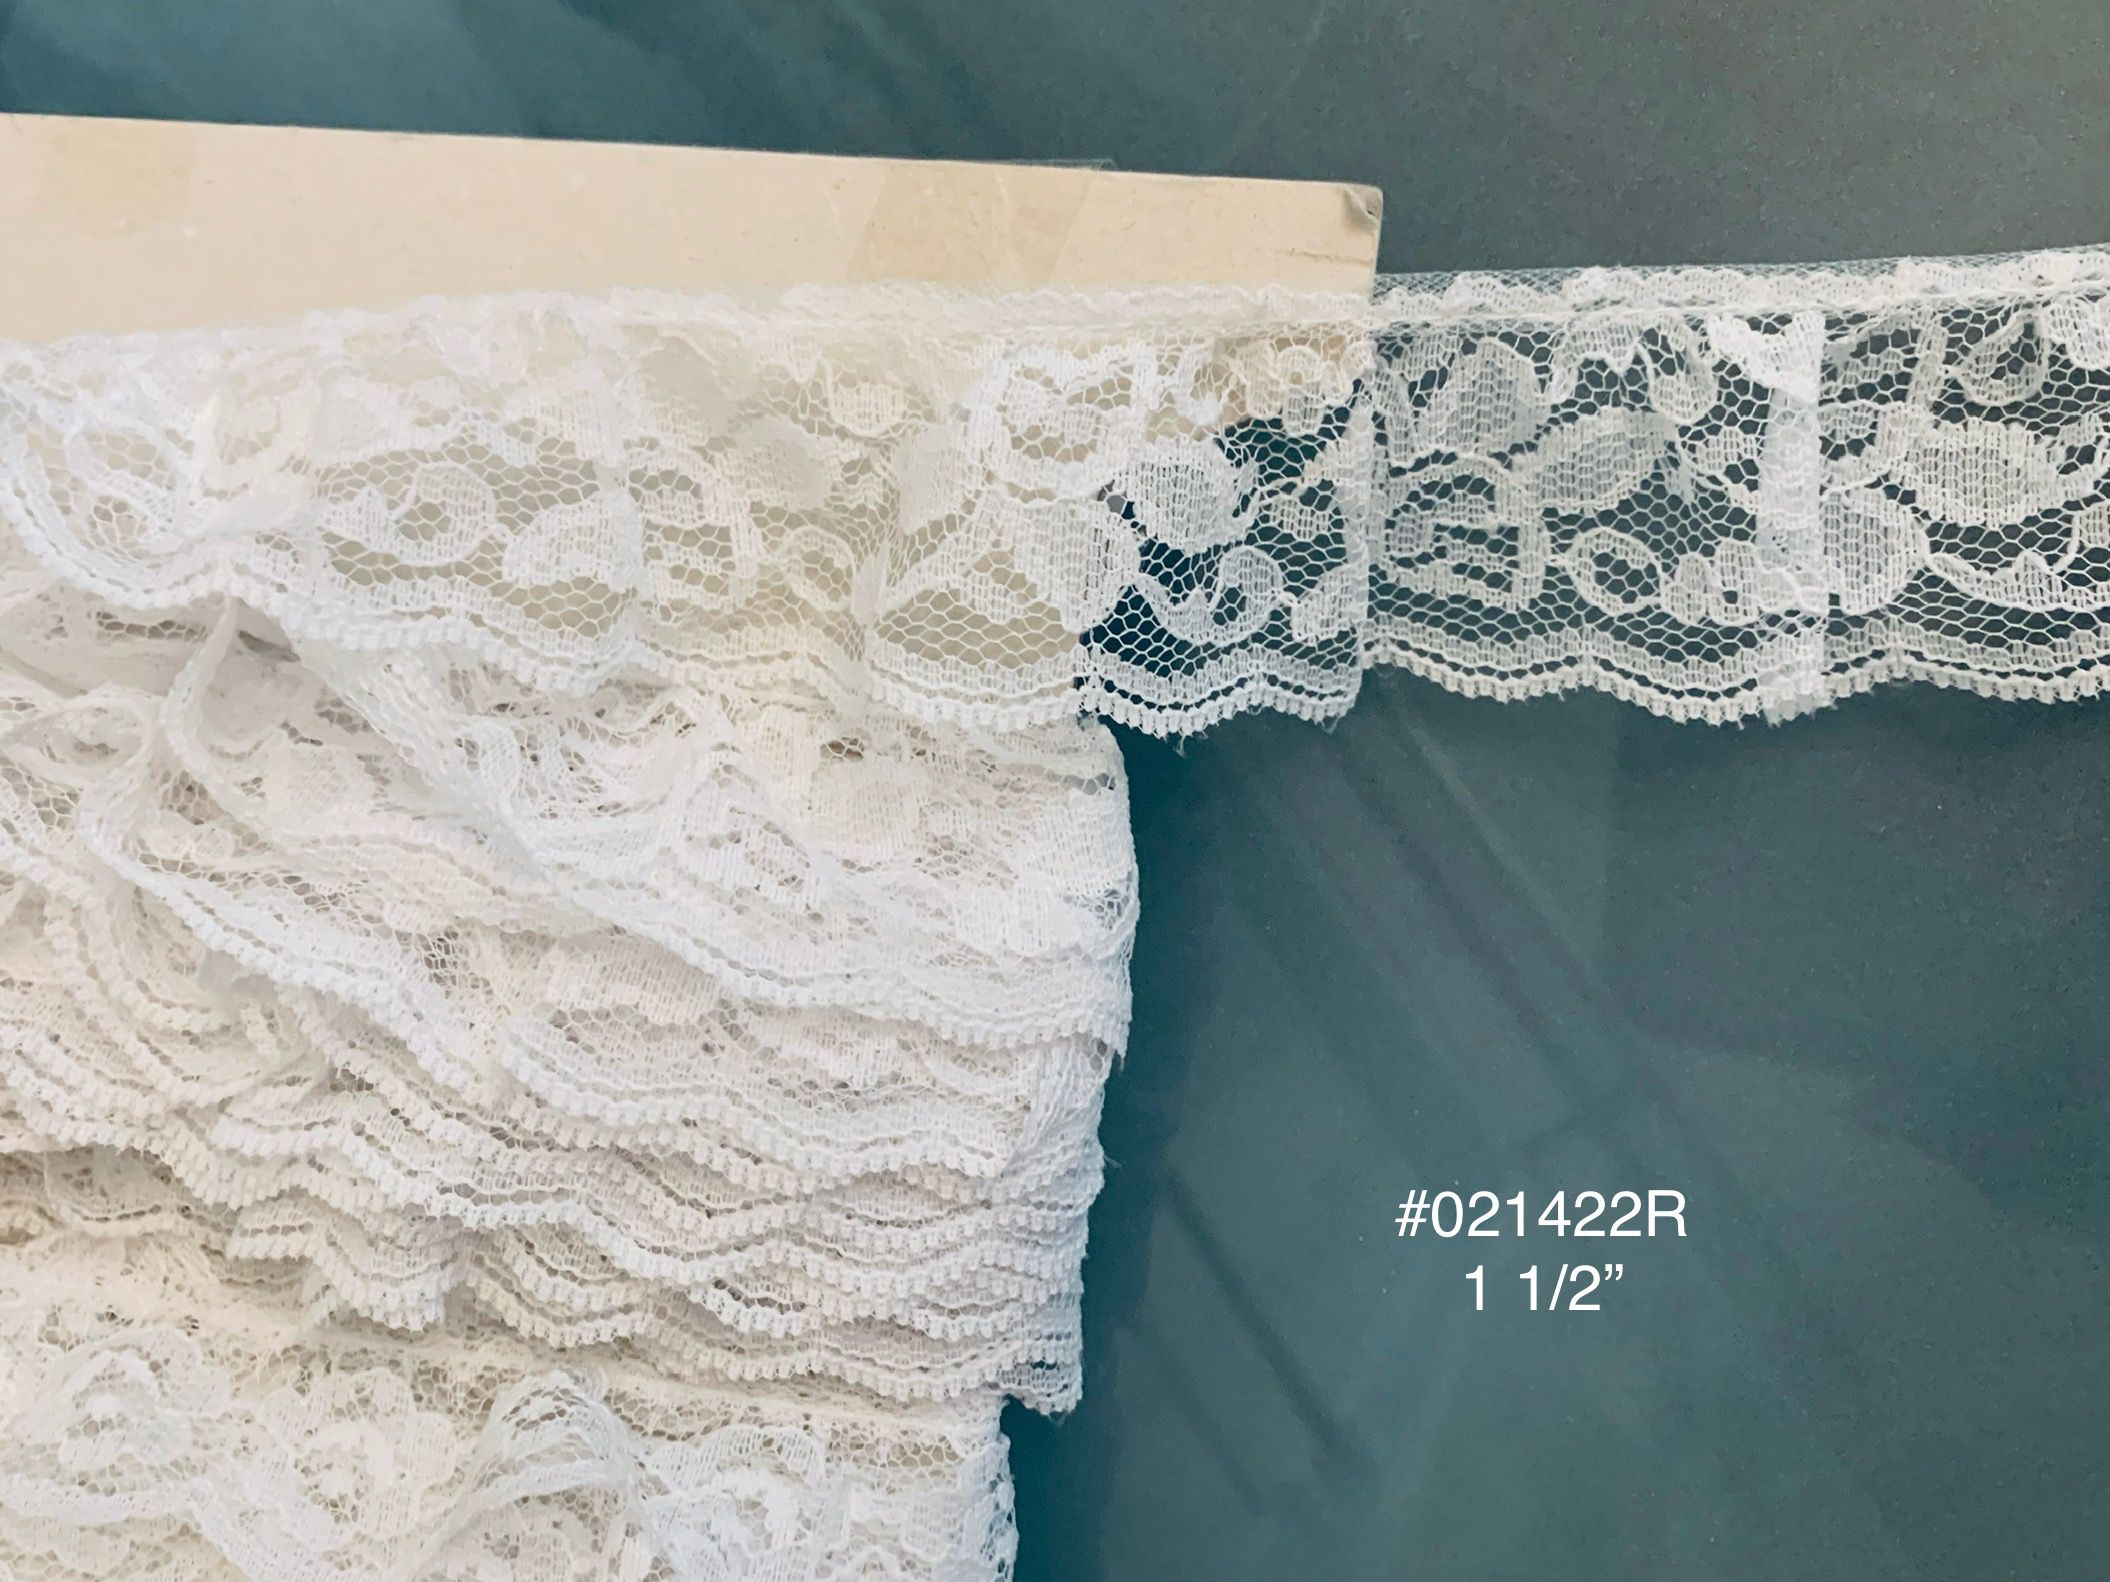 4 1/4 Yd of 1 1/2” White Gathered Lace #021422R